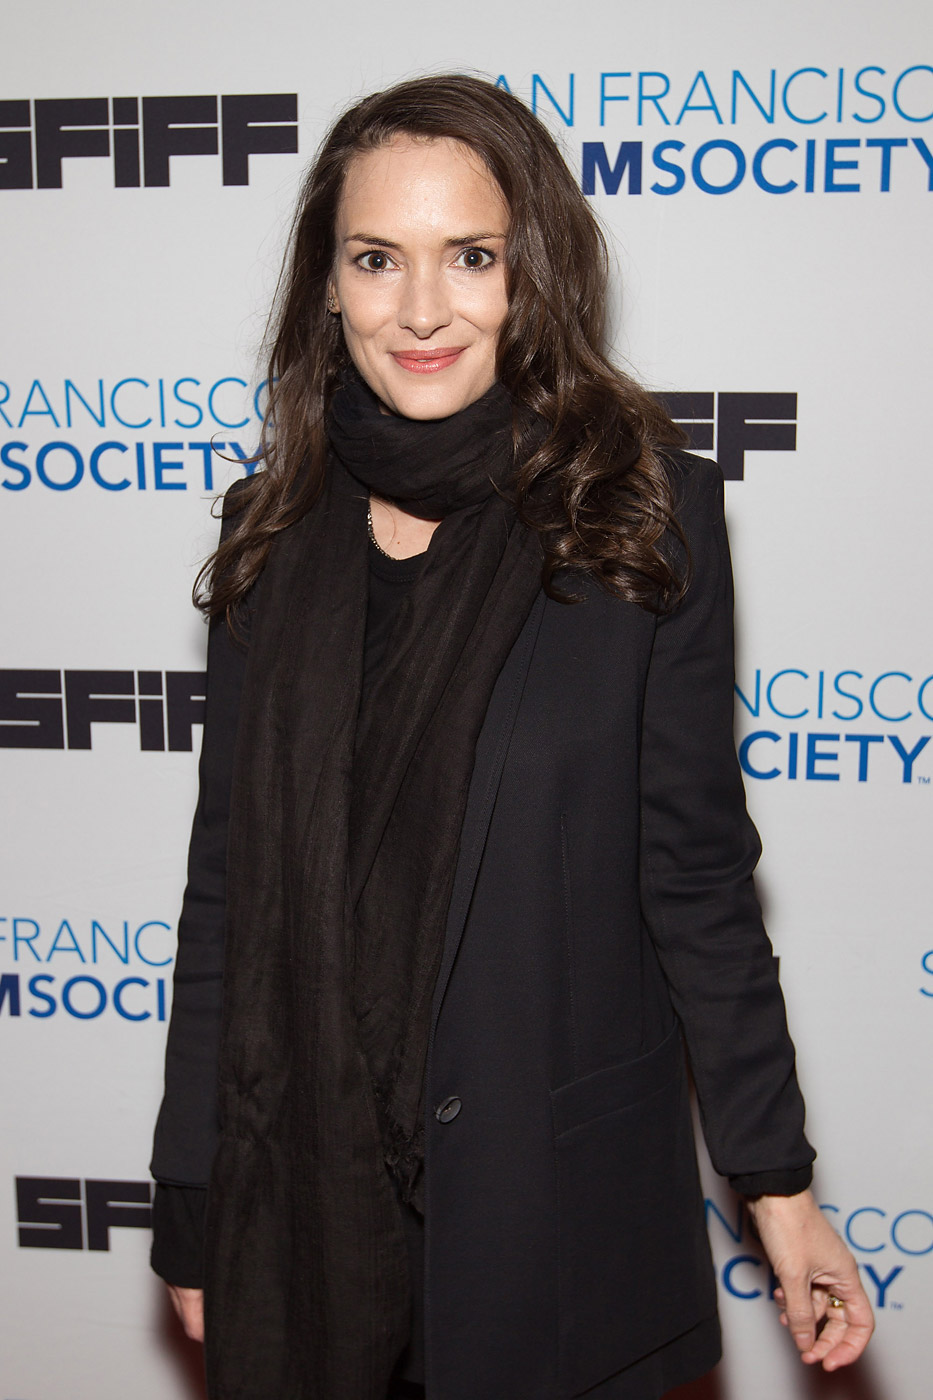 Winona Ryder arrives at the Closing Night Gala Premiere Of "Experimenter" at the 58th San Francisco International Film Festival at Castro Theater on May 7, 2015 in San Francisco. (Miikka Skaffari—FilmMagic/Getty Images)